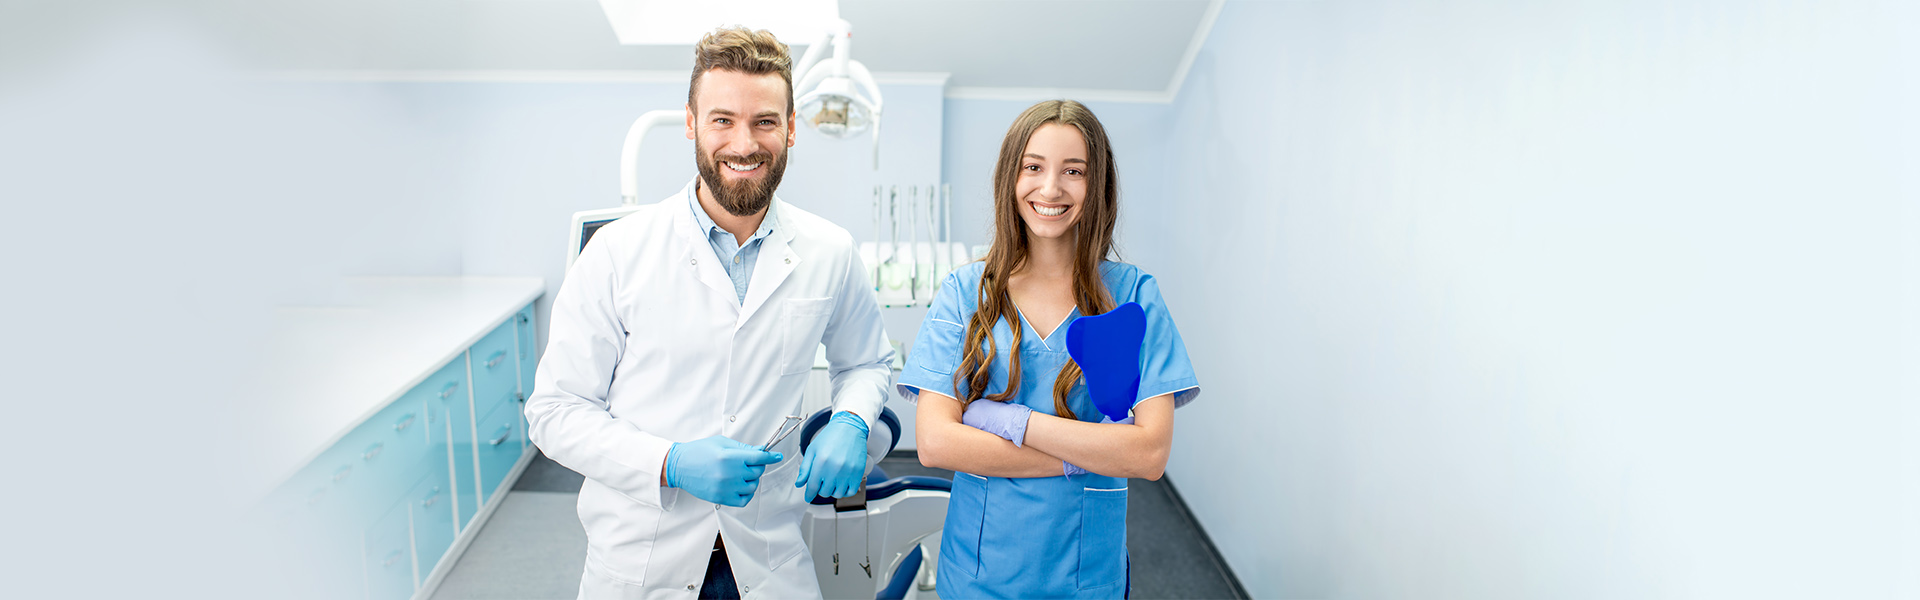 How Often Should Kids Get a Dental Exam and Cleaning?